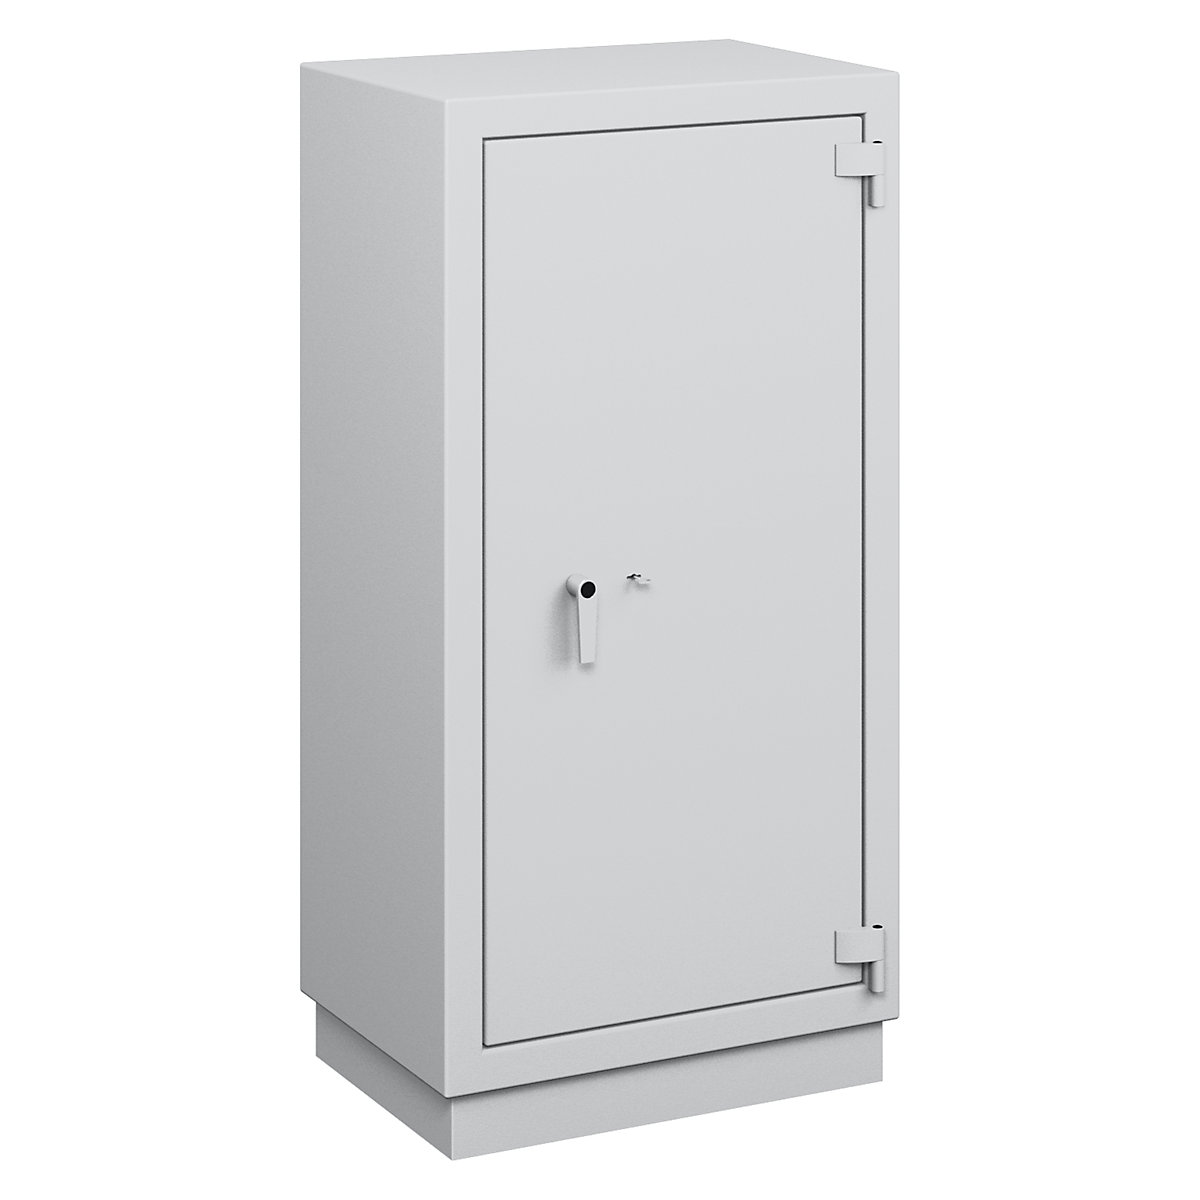 Fire resistant safety cabinet, VDMA B, S2, S 120 P, HxWxD 1600 x 794 x 560 mm-7